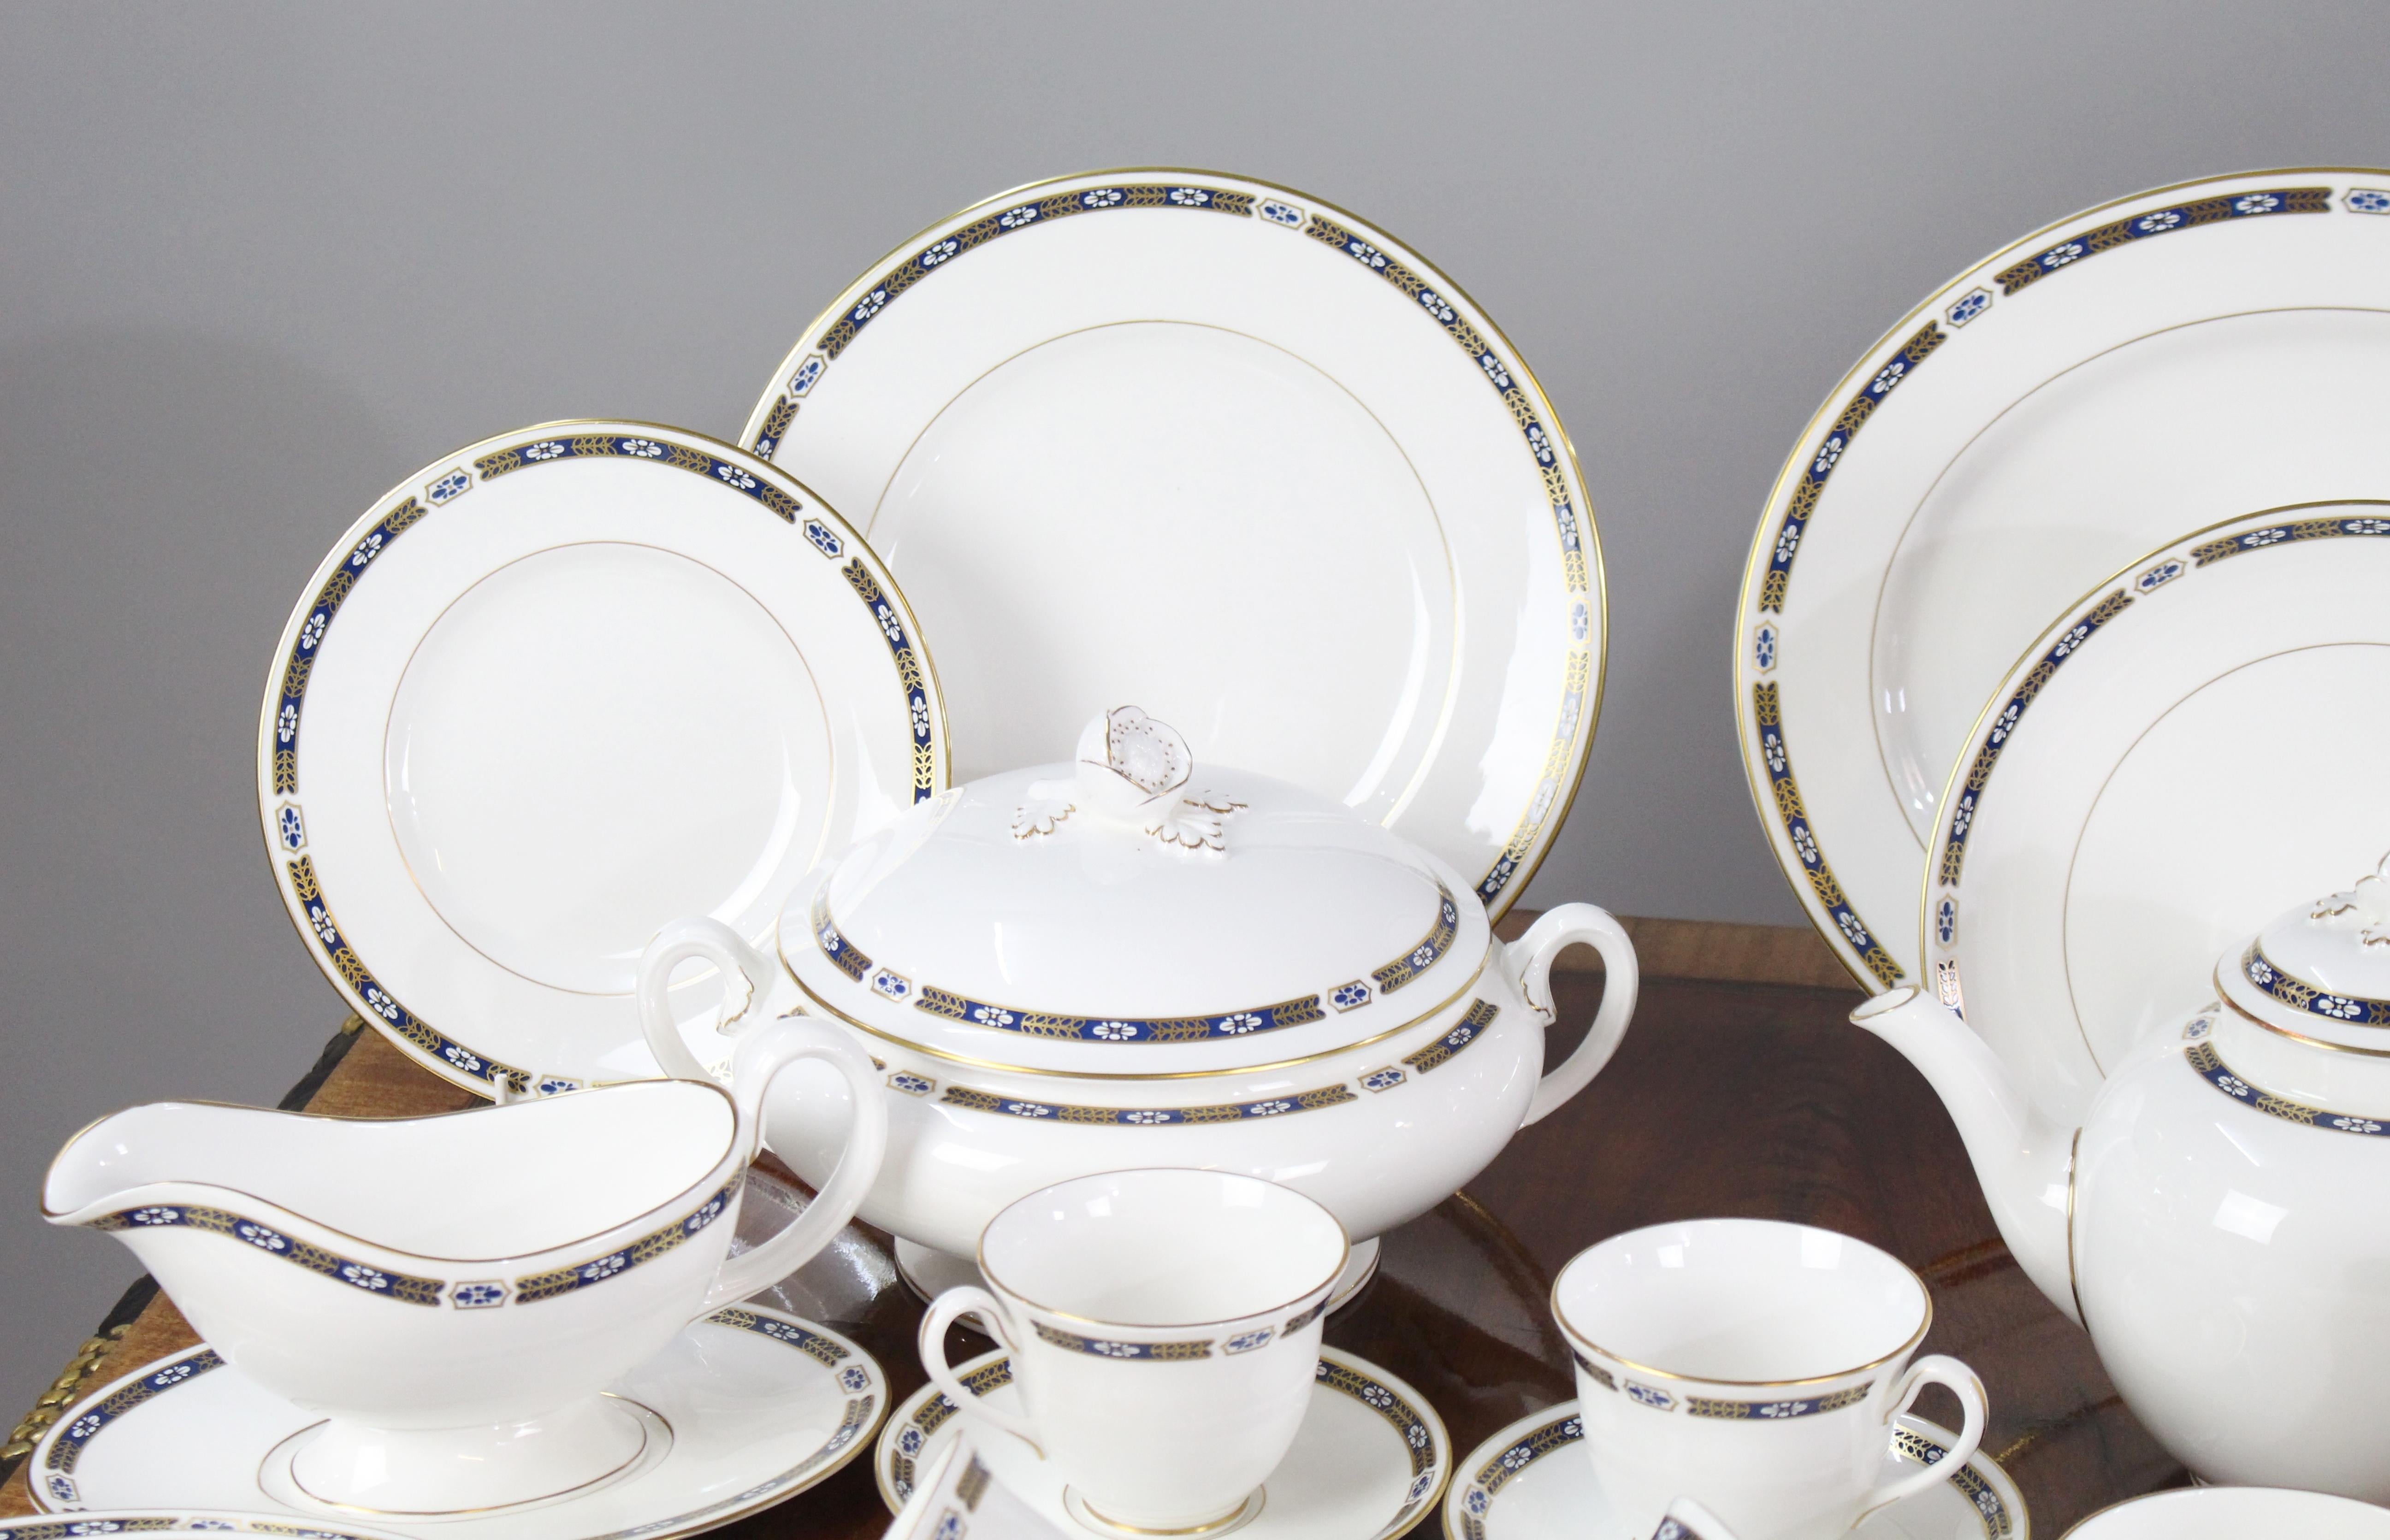 Manufacturer 
Royal Worcester

Pattern 
Grosvenor (Limited edition pattern produced in 1983)

Pieces 
52 pieces; 8 place setting

Pieces 
Everything pictured: pair of lidded tureens, large oval serving plate, 8 x dinner plates (10 1/2